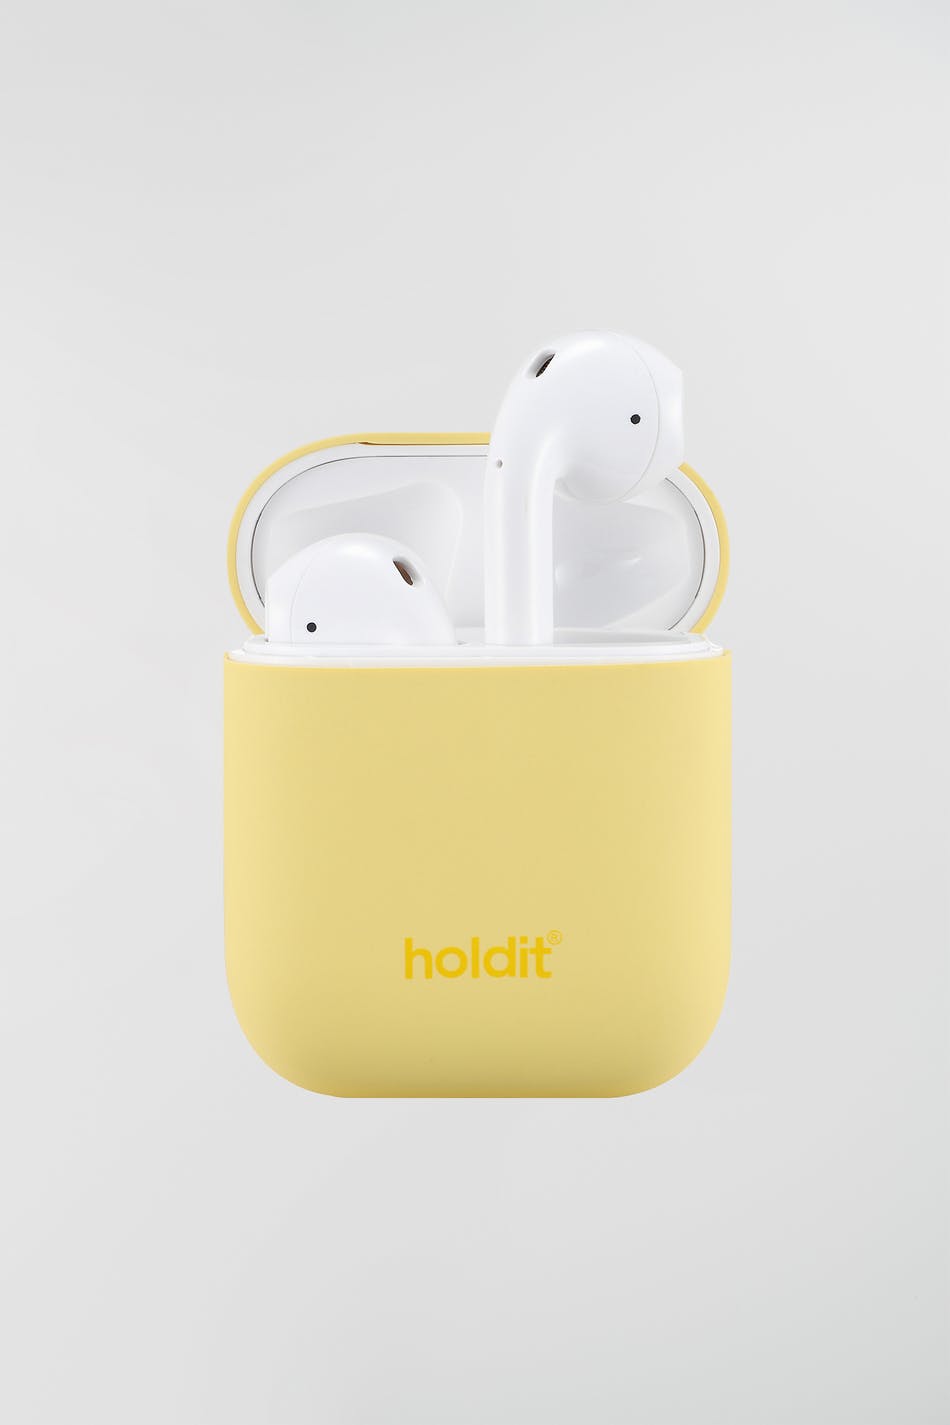 Holdit airpods silicone case